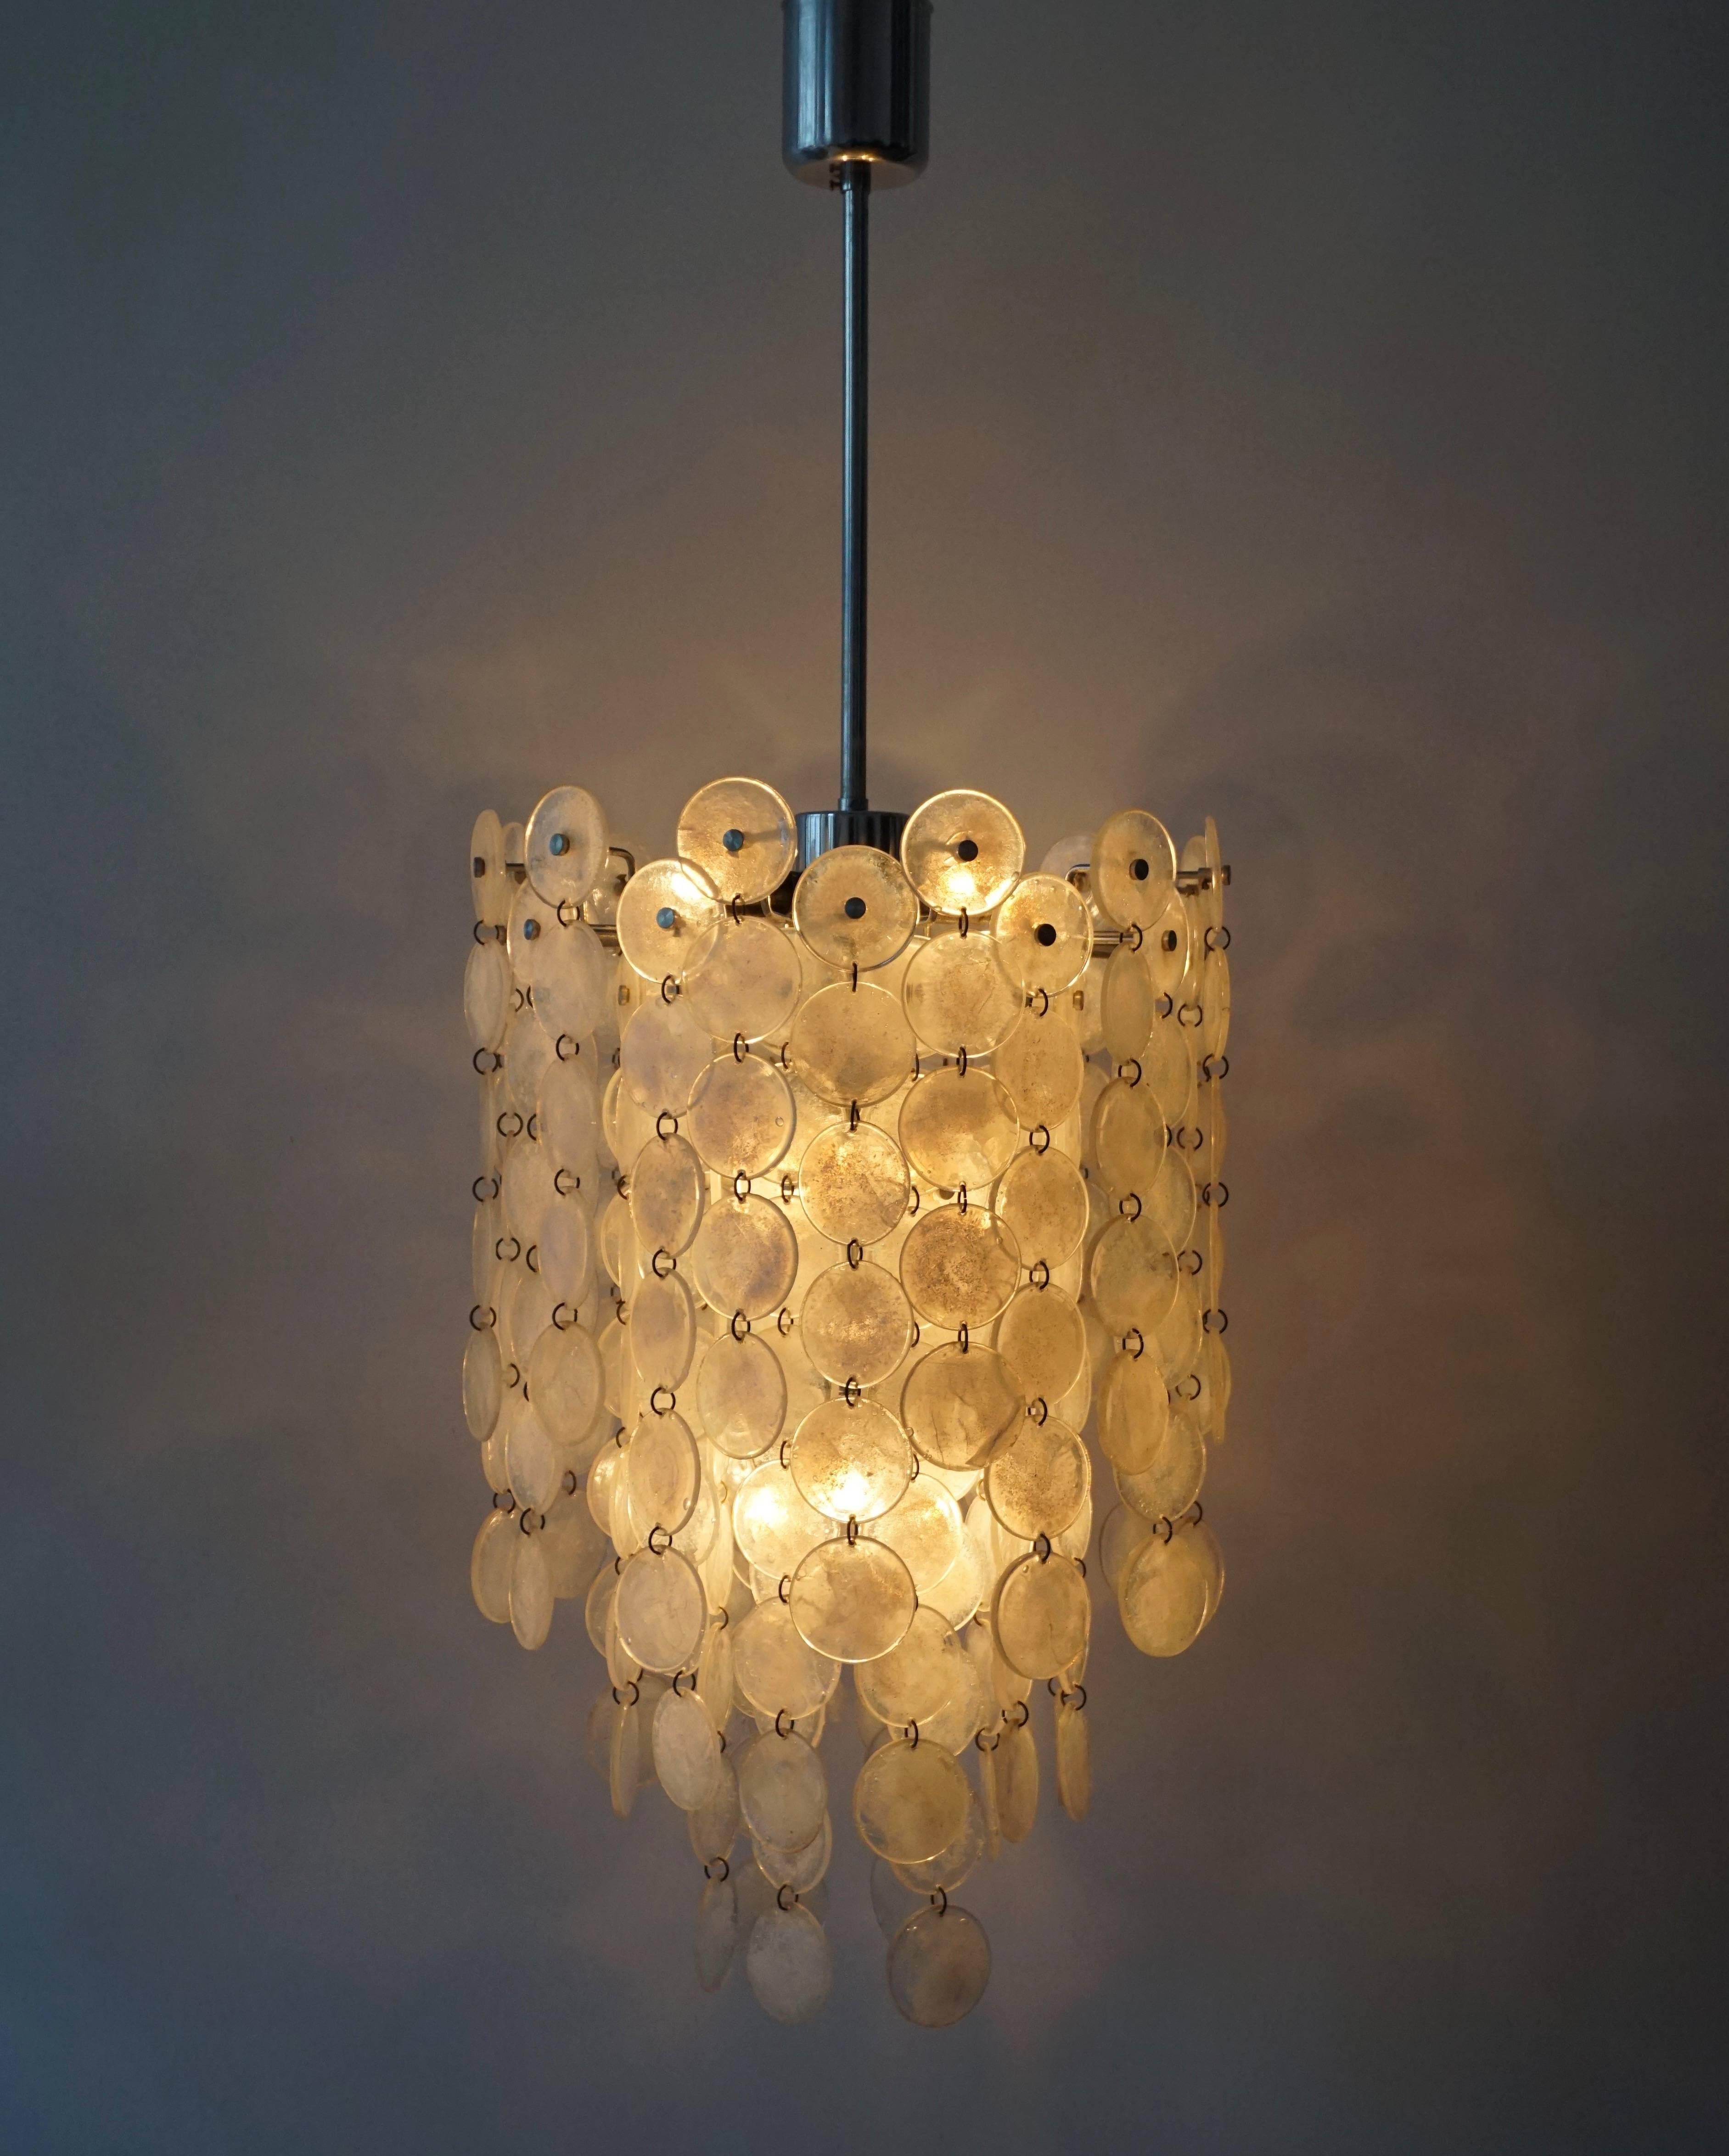 Italian Murano glass chandelier.
The light requires ten single E14 screw fit lightbulbs (40Watt max.) LED compatible.

Measures: 
Total height 110 cm.
Diameter 38 cm.
Height of the lamp without the grid is 60 cm.